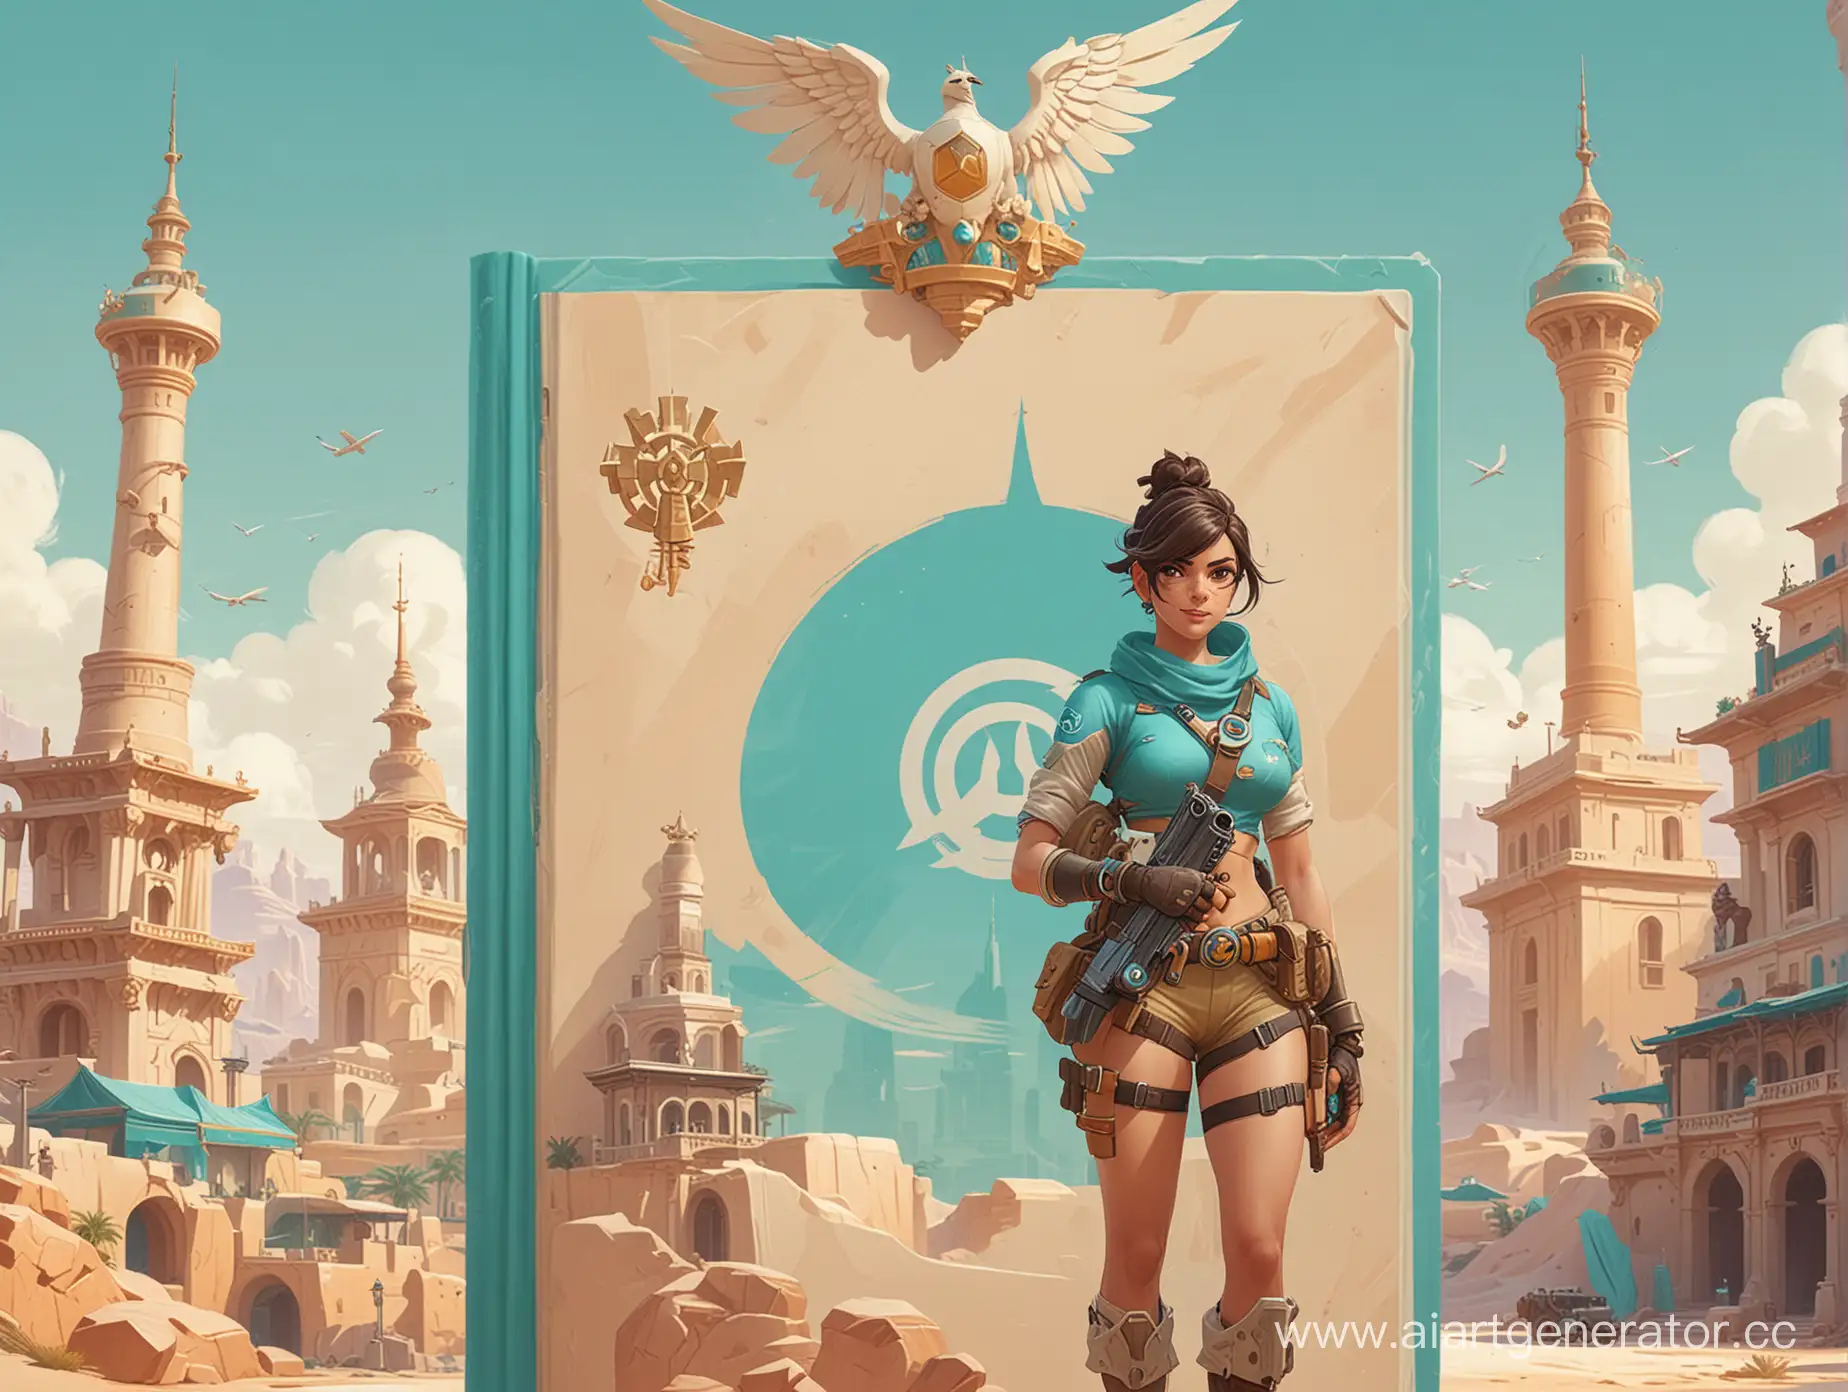 Turquoise-and-Beige-World-Travels-Overwatch-2-Inspired-Cover